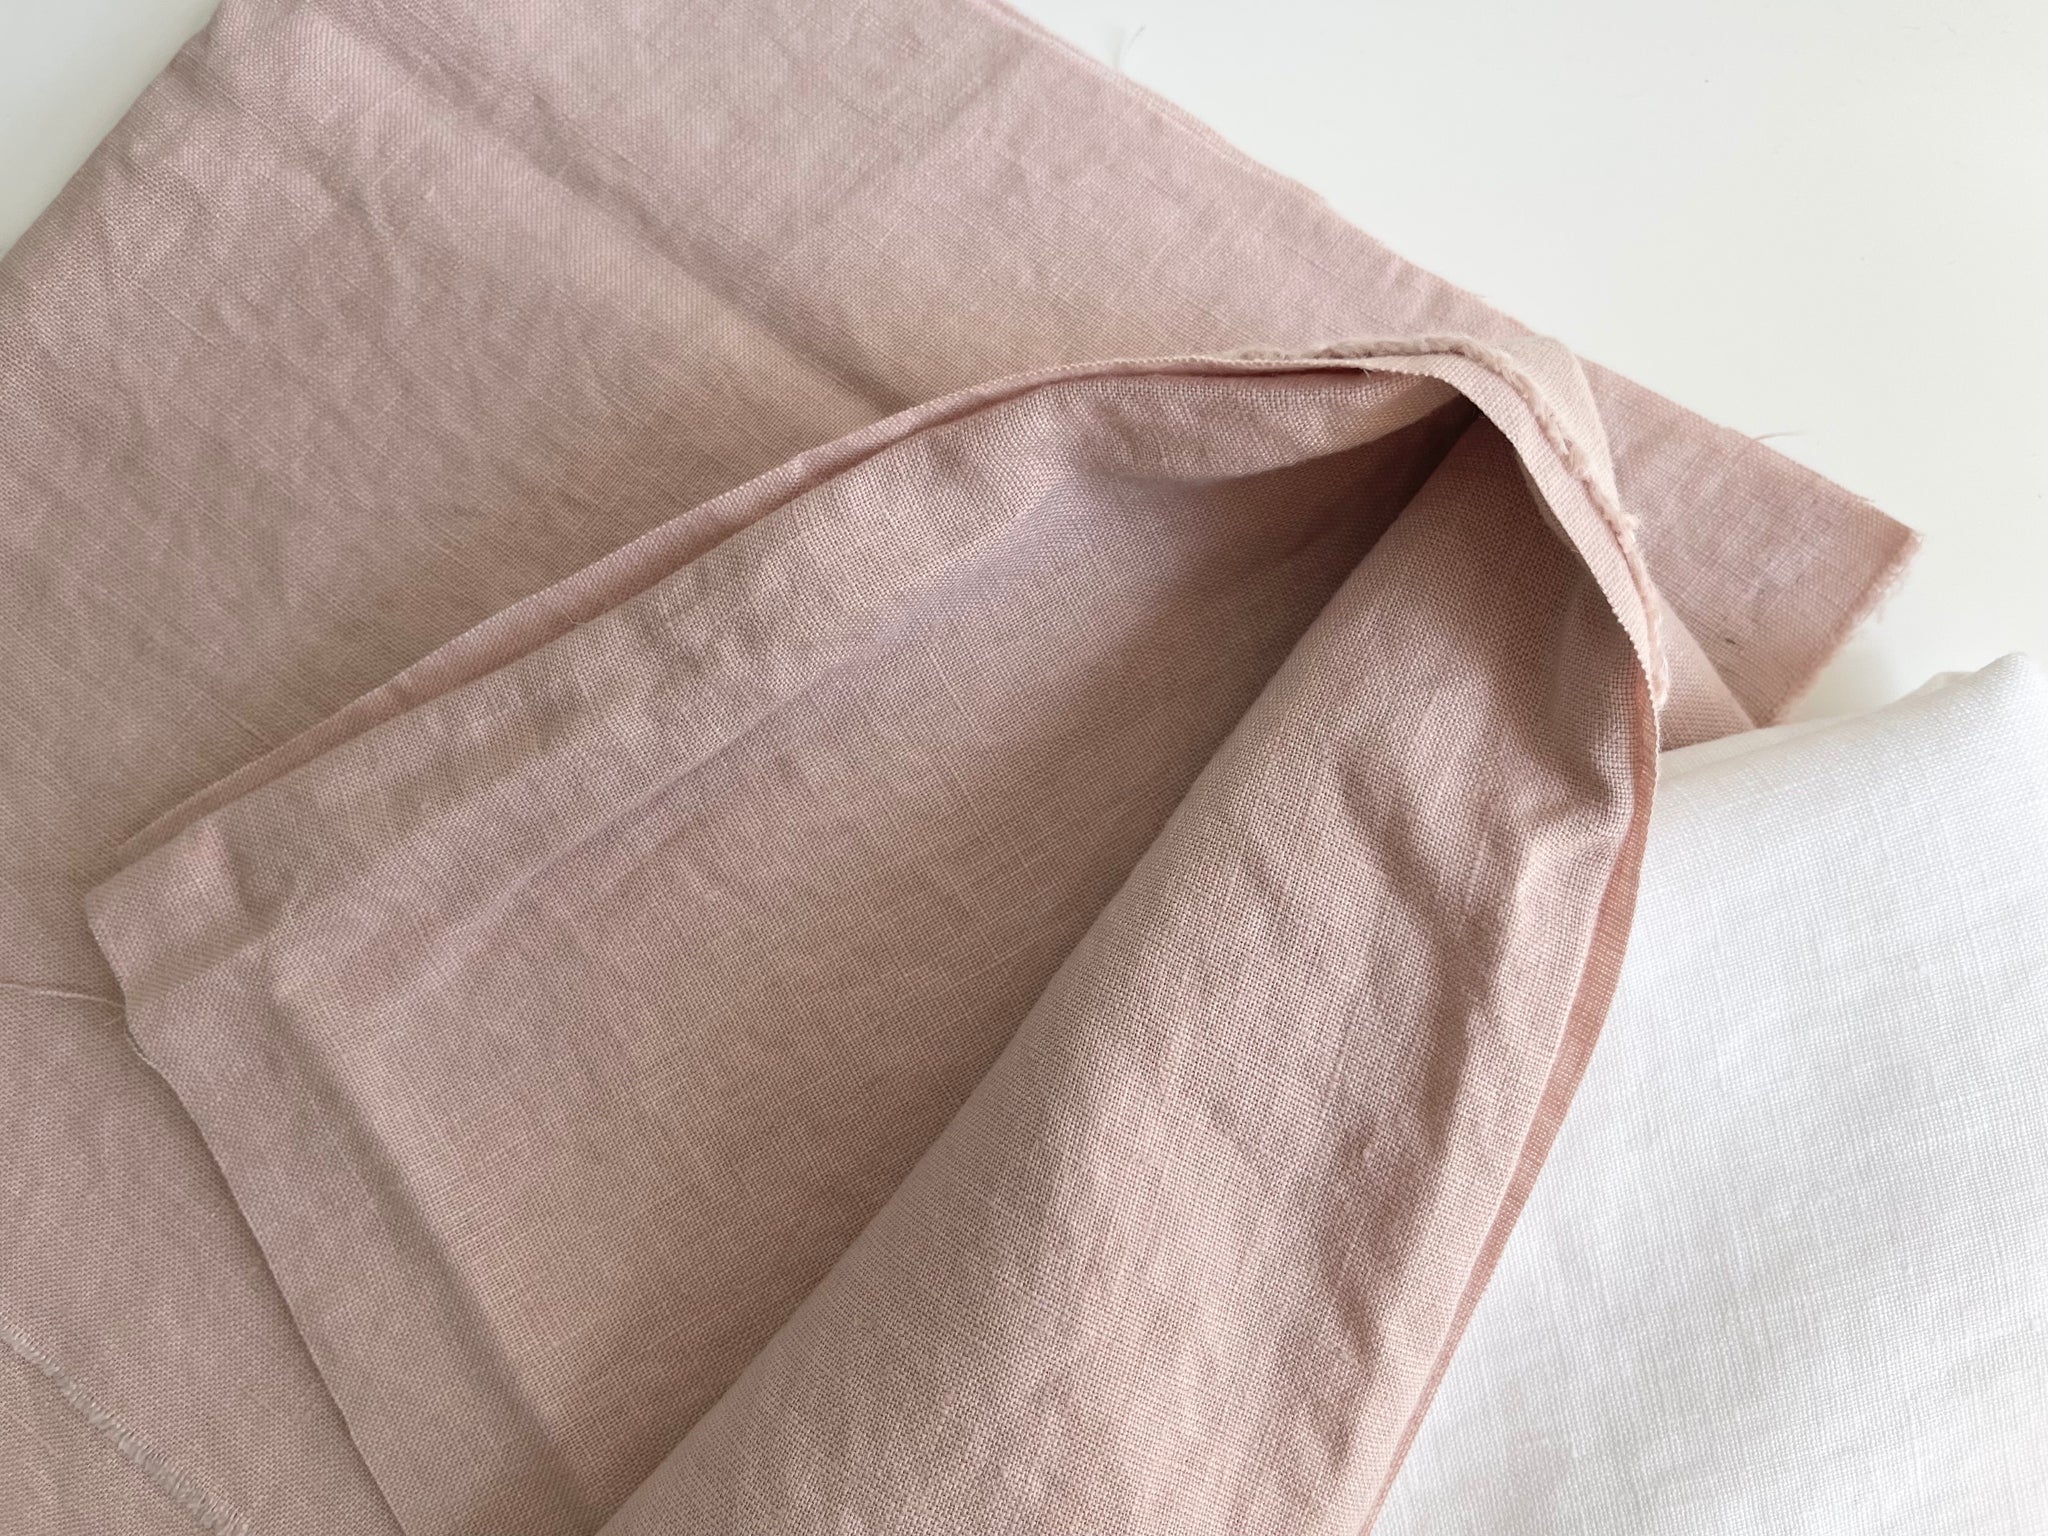 Linen Fabric Remnants - Pure White and Dusty Rose